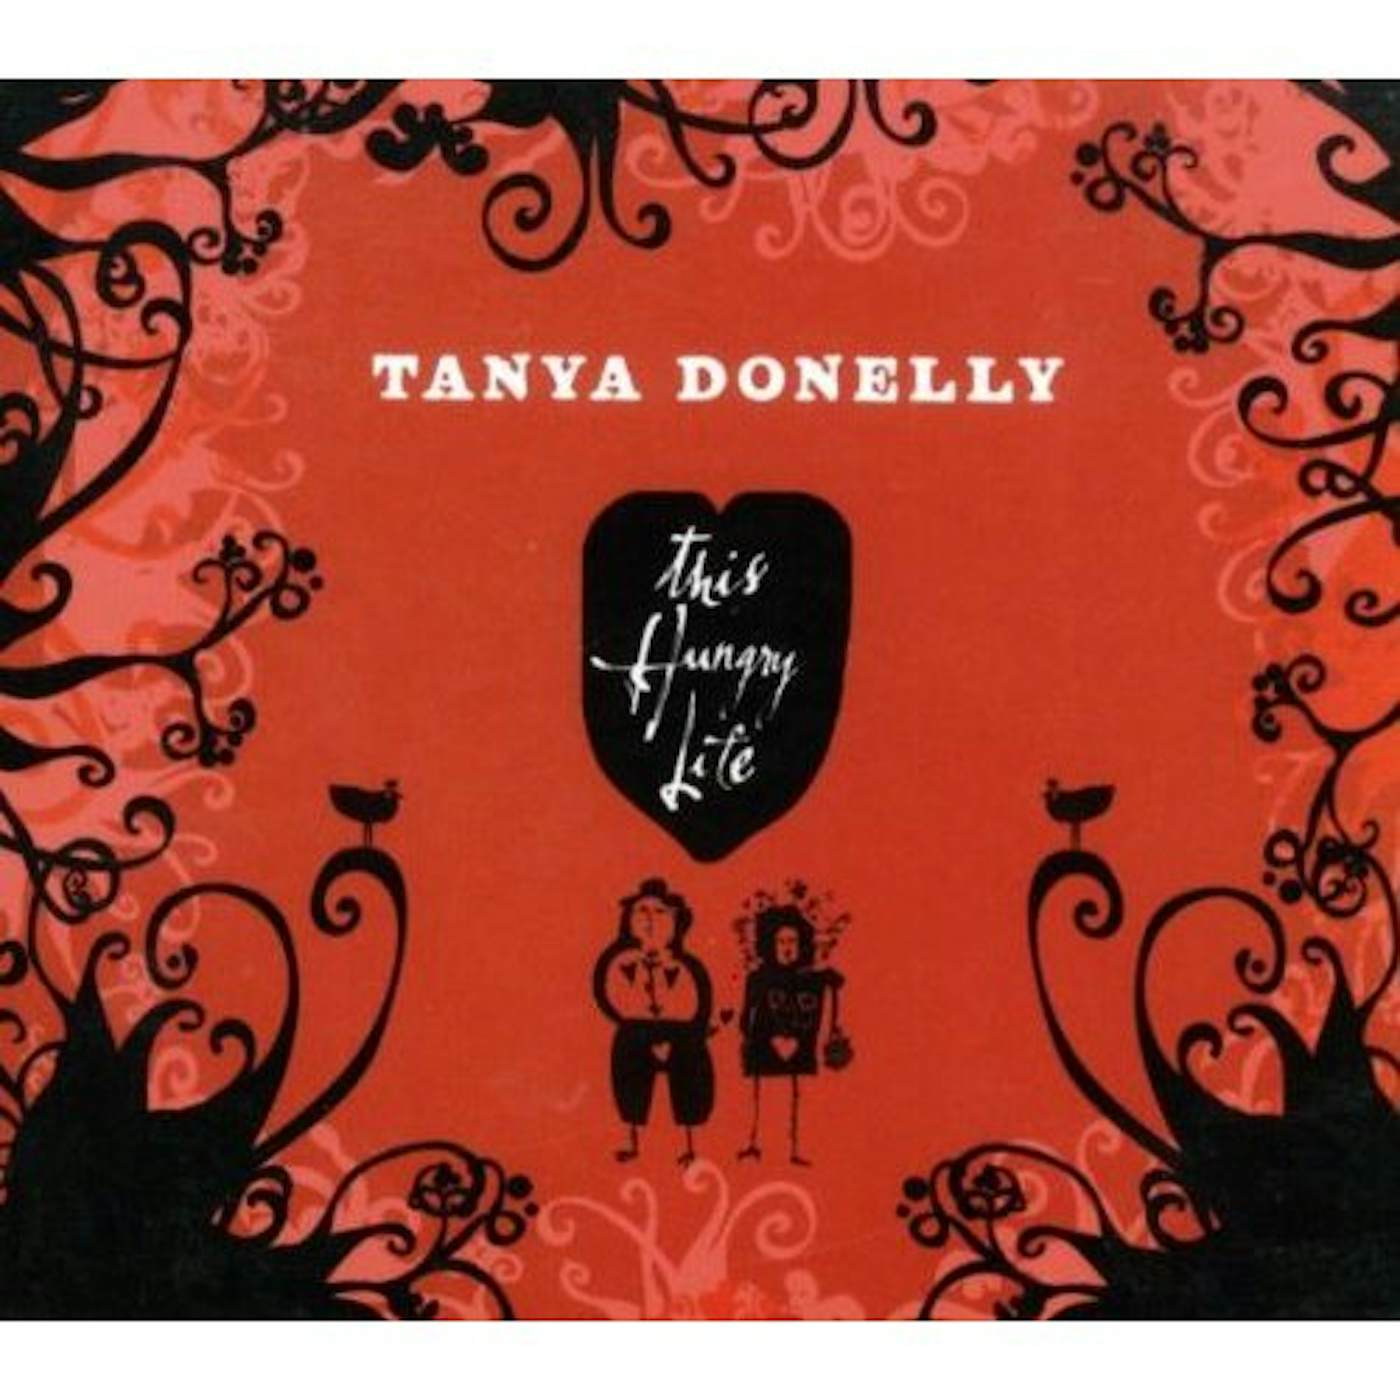 Tanya Donelly THIS HUNGRY LIFE CD